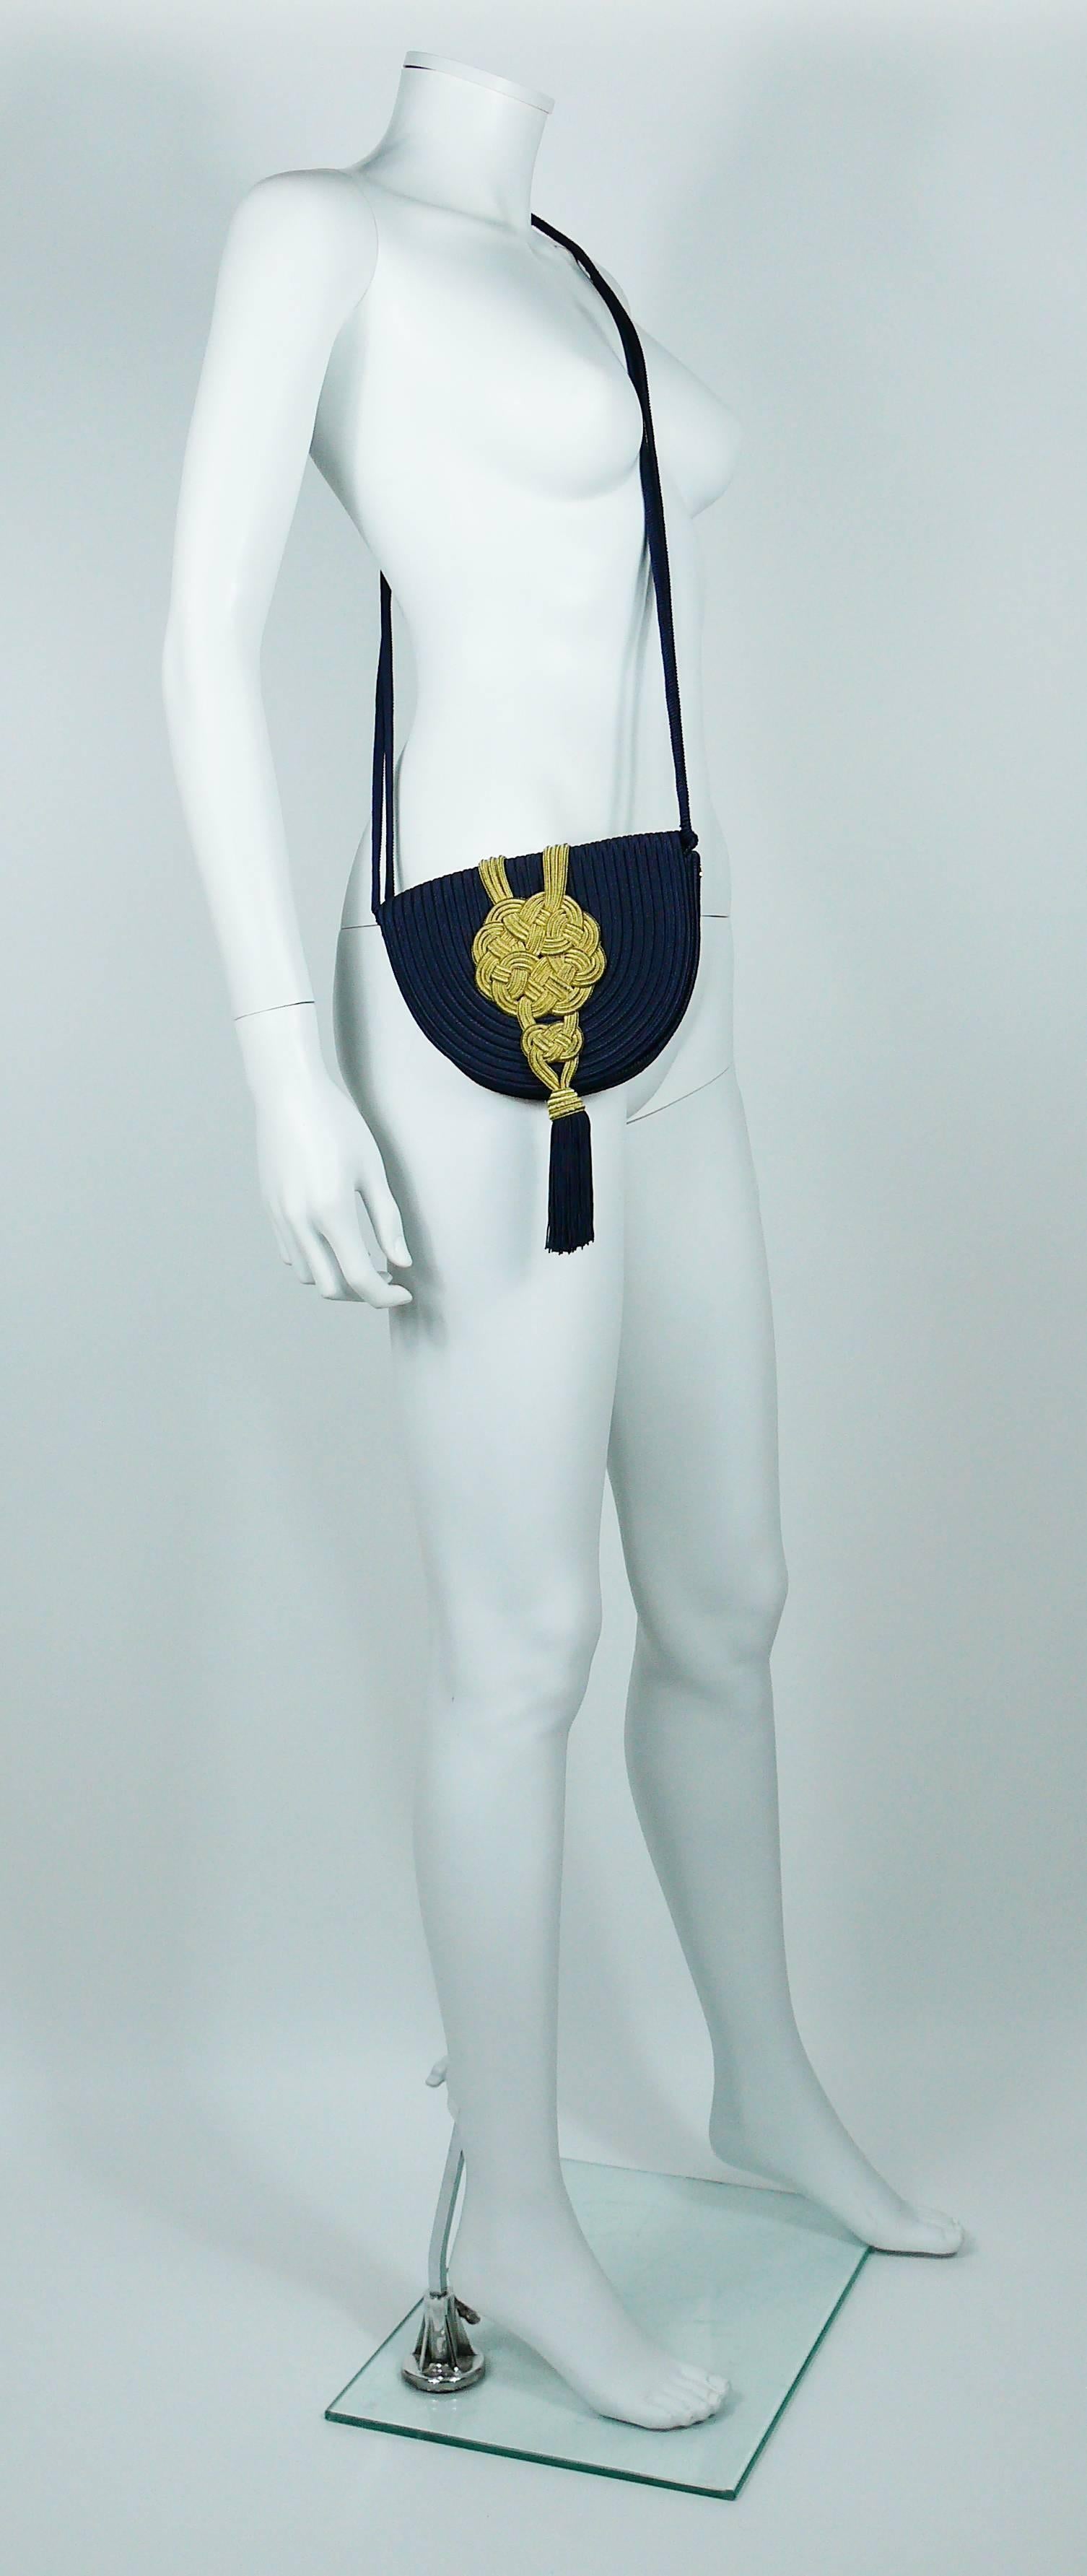 YVES SAINT LAURENT Rive Gauche vintage oriental inspired navy blue passementerie and tassel evening purse.

This purse features :
- Navy blue body adorned with massive gold lame passementerie ornaments on front and back.
- Navy blue tassel.
-